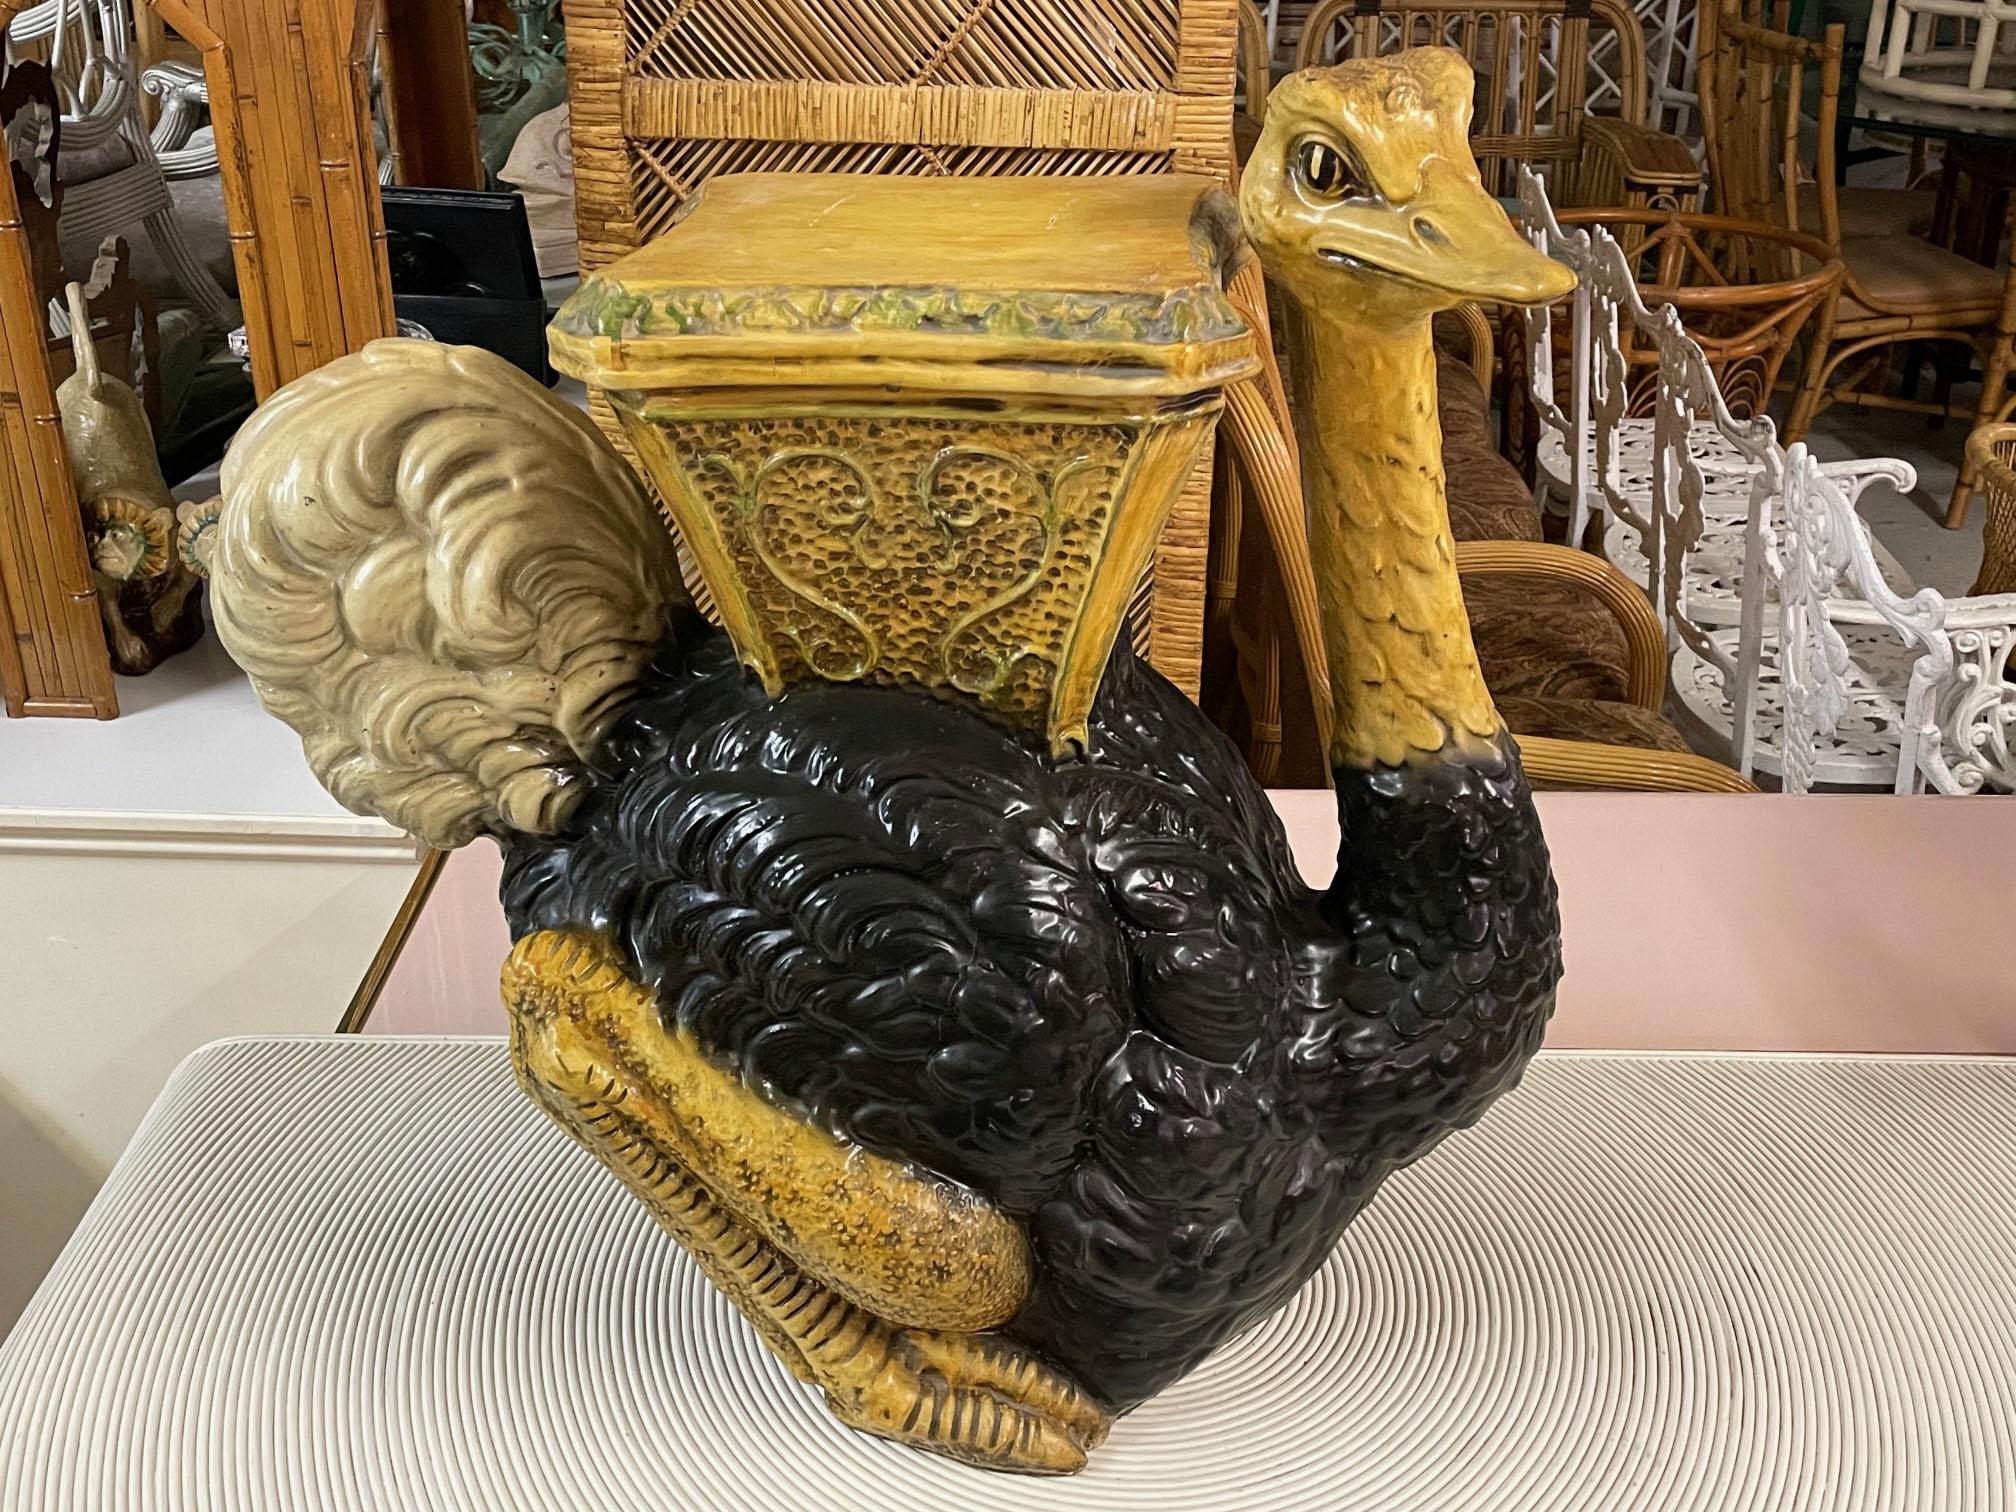 Rare large carved ostrich garden seat features vibrant black finish and stands over 25 inches tall. Very good vintage condition with minor crazing on back side and very minor imperfections consistent with age (see photos). We believe the material to